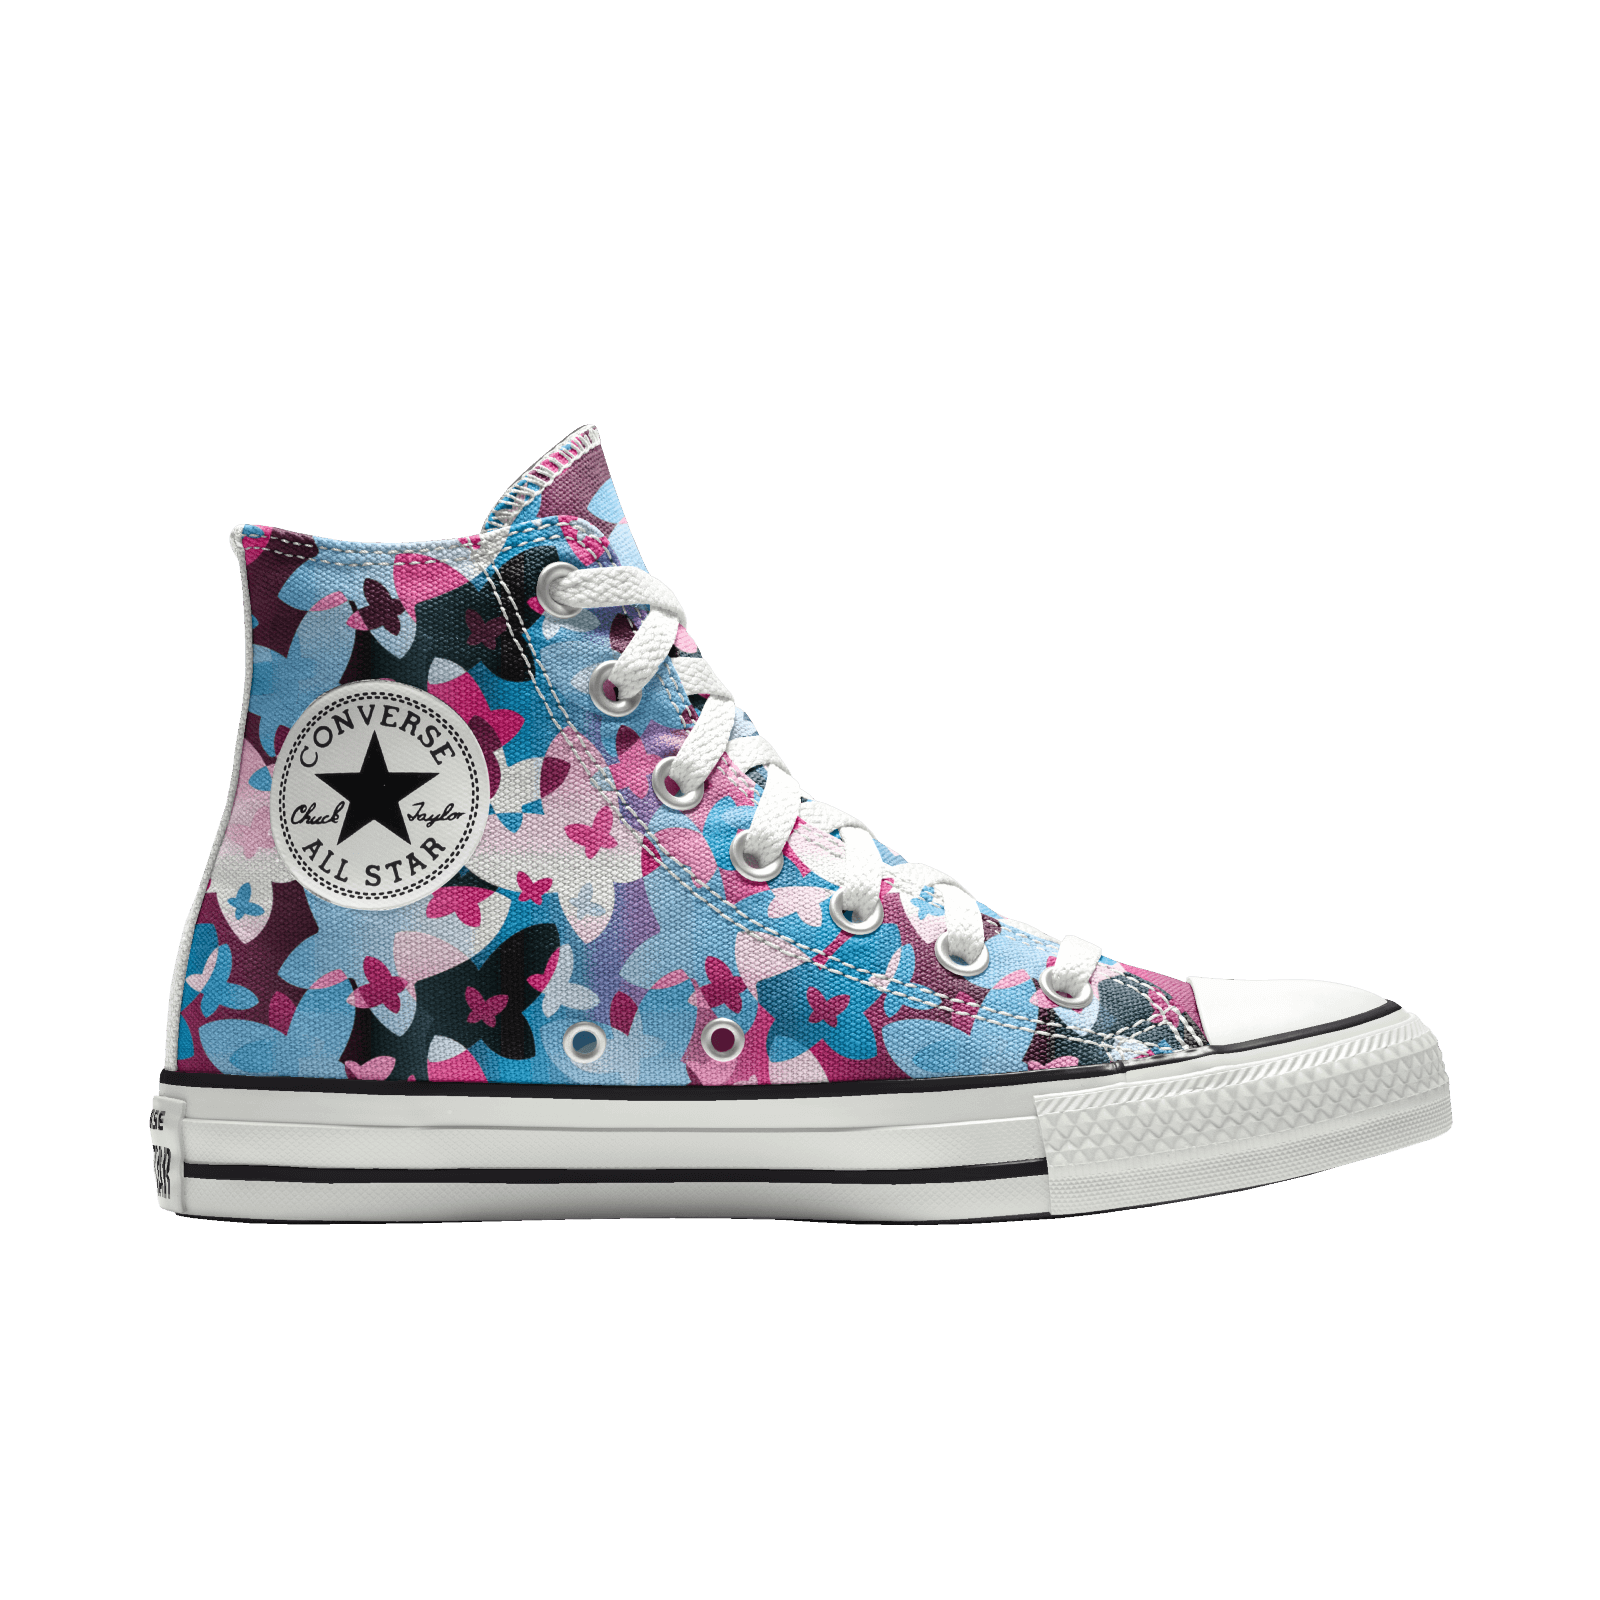 CNK-Converse-Pride-2021-Collection-Xandro-All-Star-High-Shoe.png